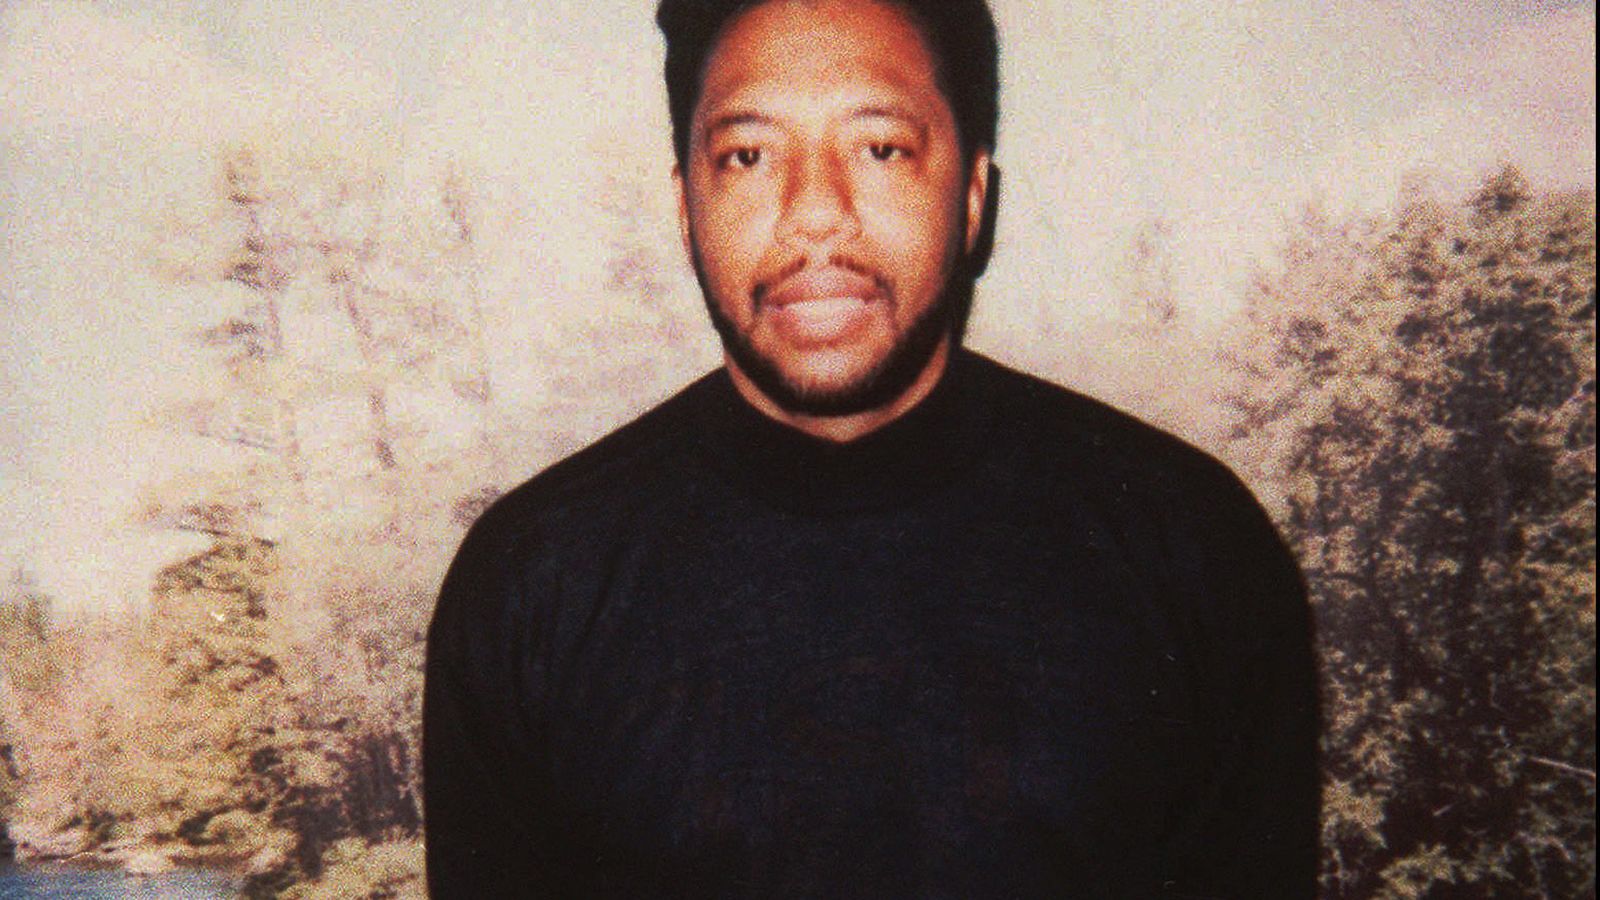 Larry Hoover, reputed leader of Chicago's Gangster Disciples street gang, is serving 150 to 200 years for murder. 